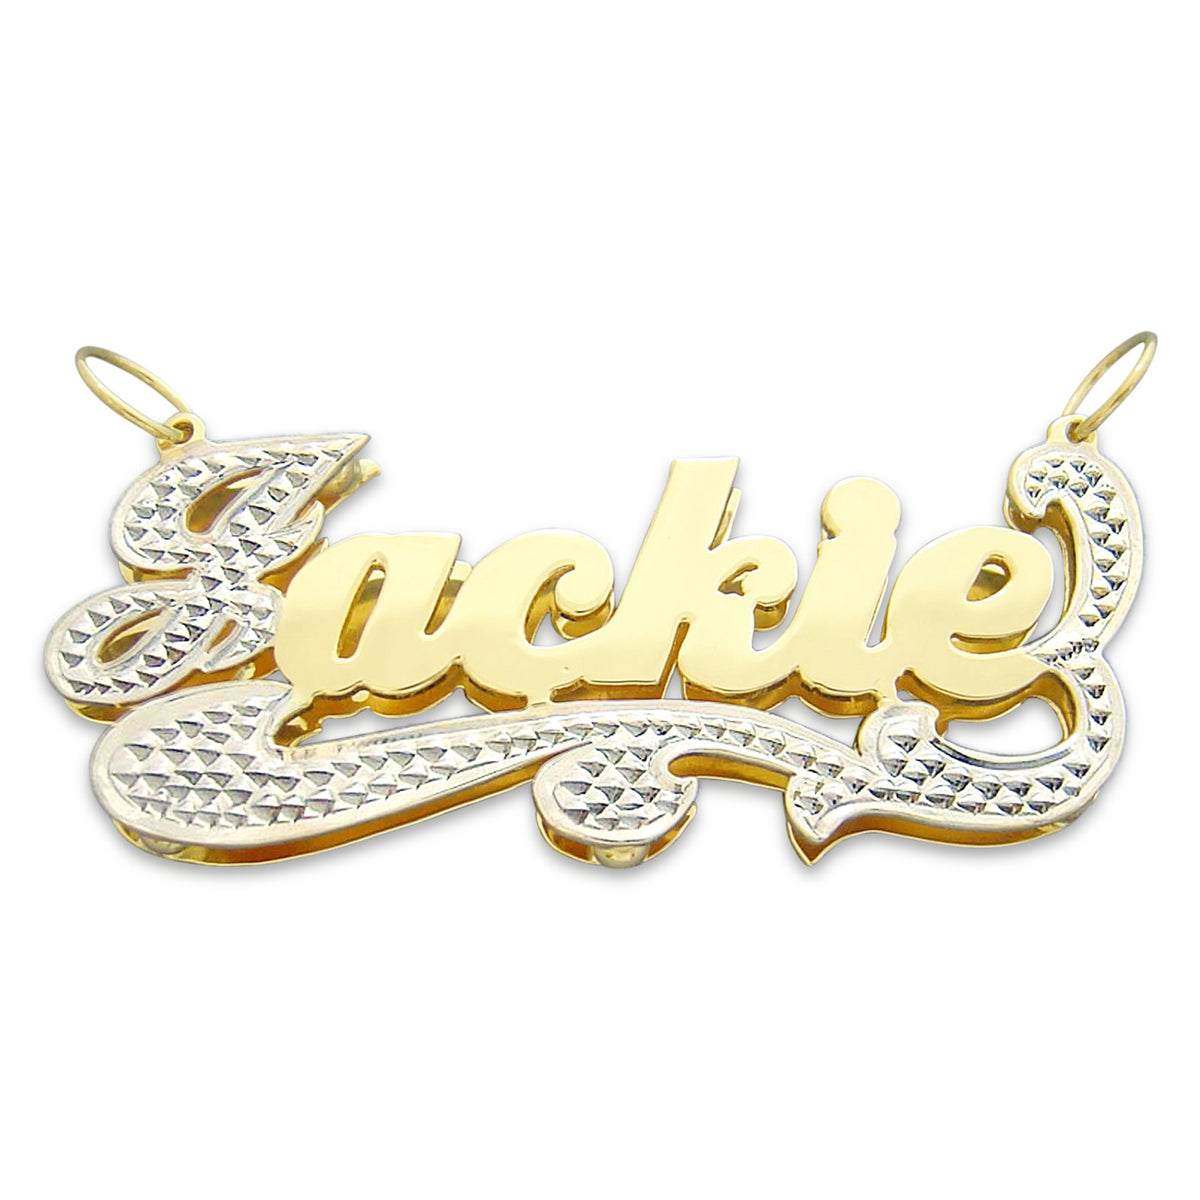 Personalized Jewelry Diamond Name Pendant Charm Solid 10k or 14k gold 2 Tone Fine Jewelry ND17